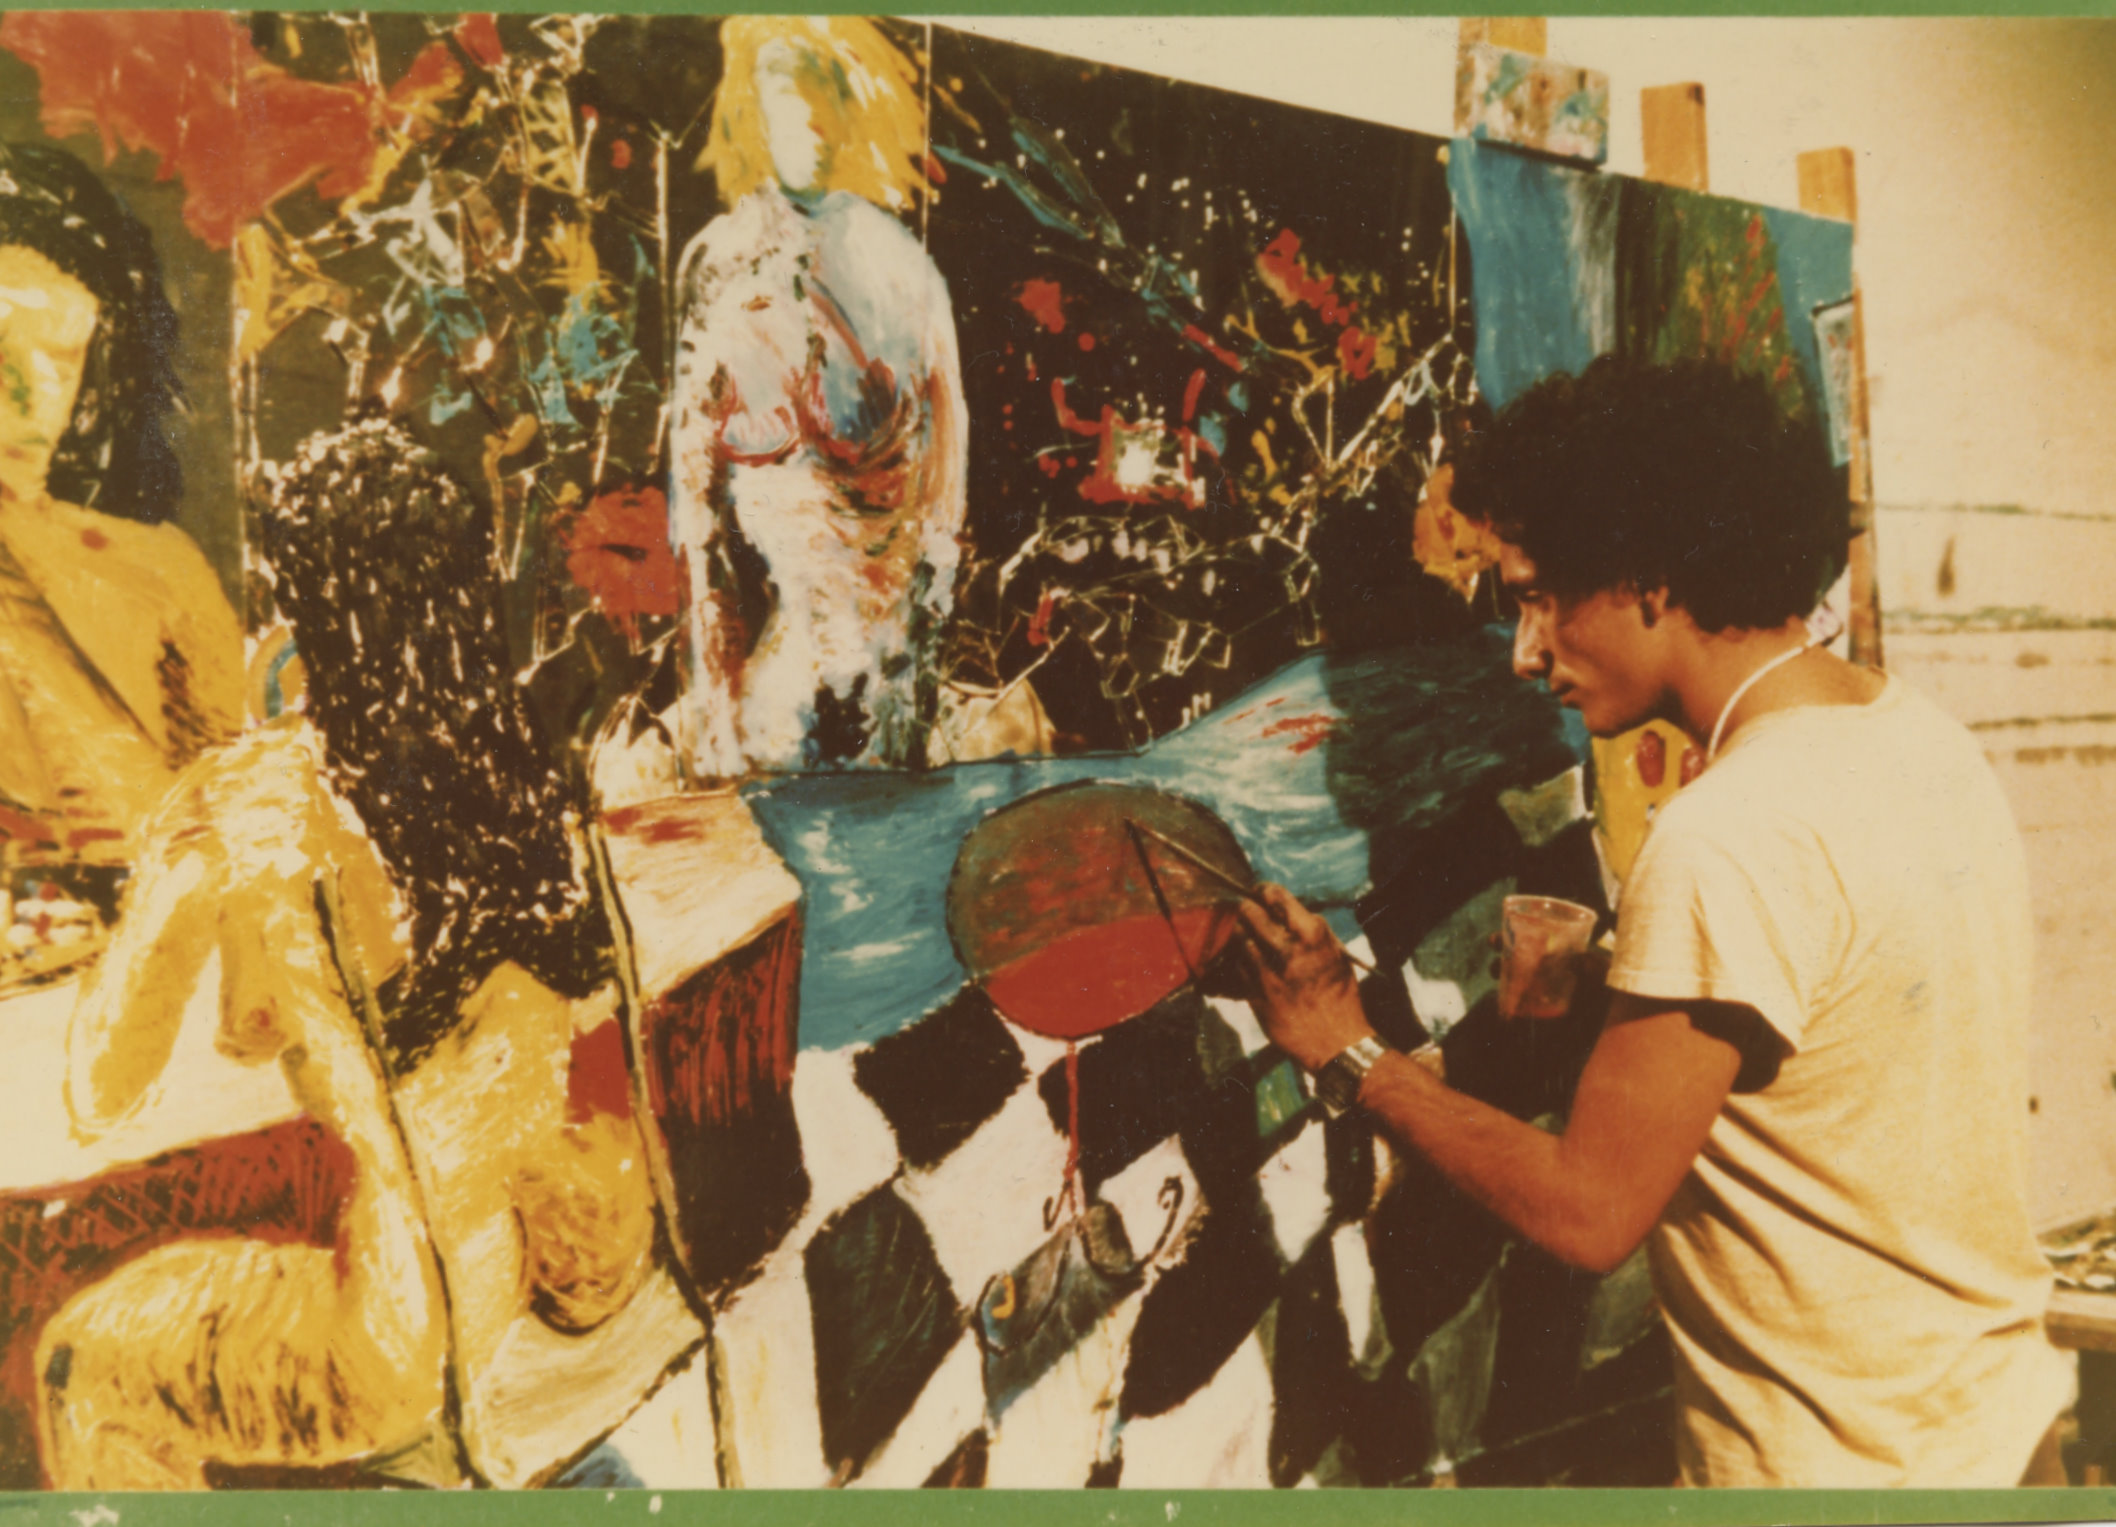 The picture shows Bedri Baykam painting a big canvas. The artist is on the right side of the picure, while the opposite side is covered by the big tableau he's working on